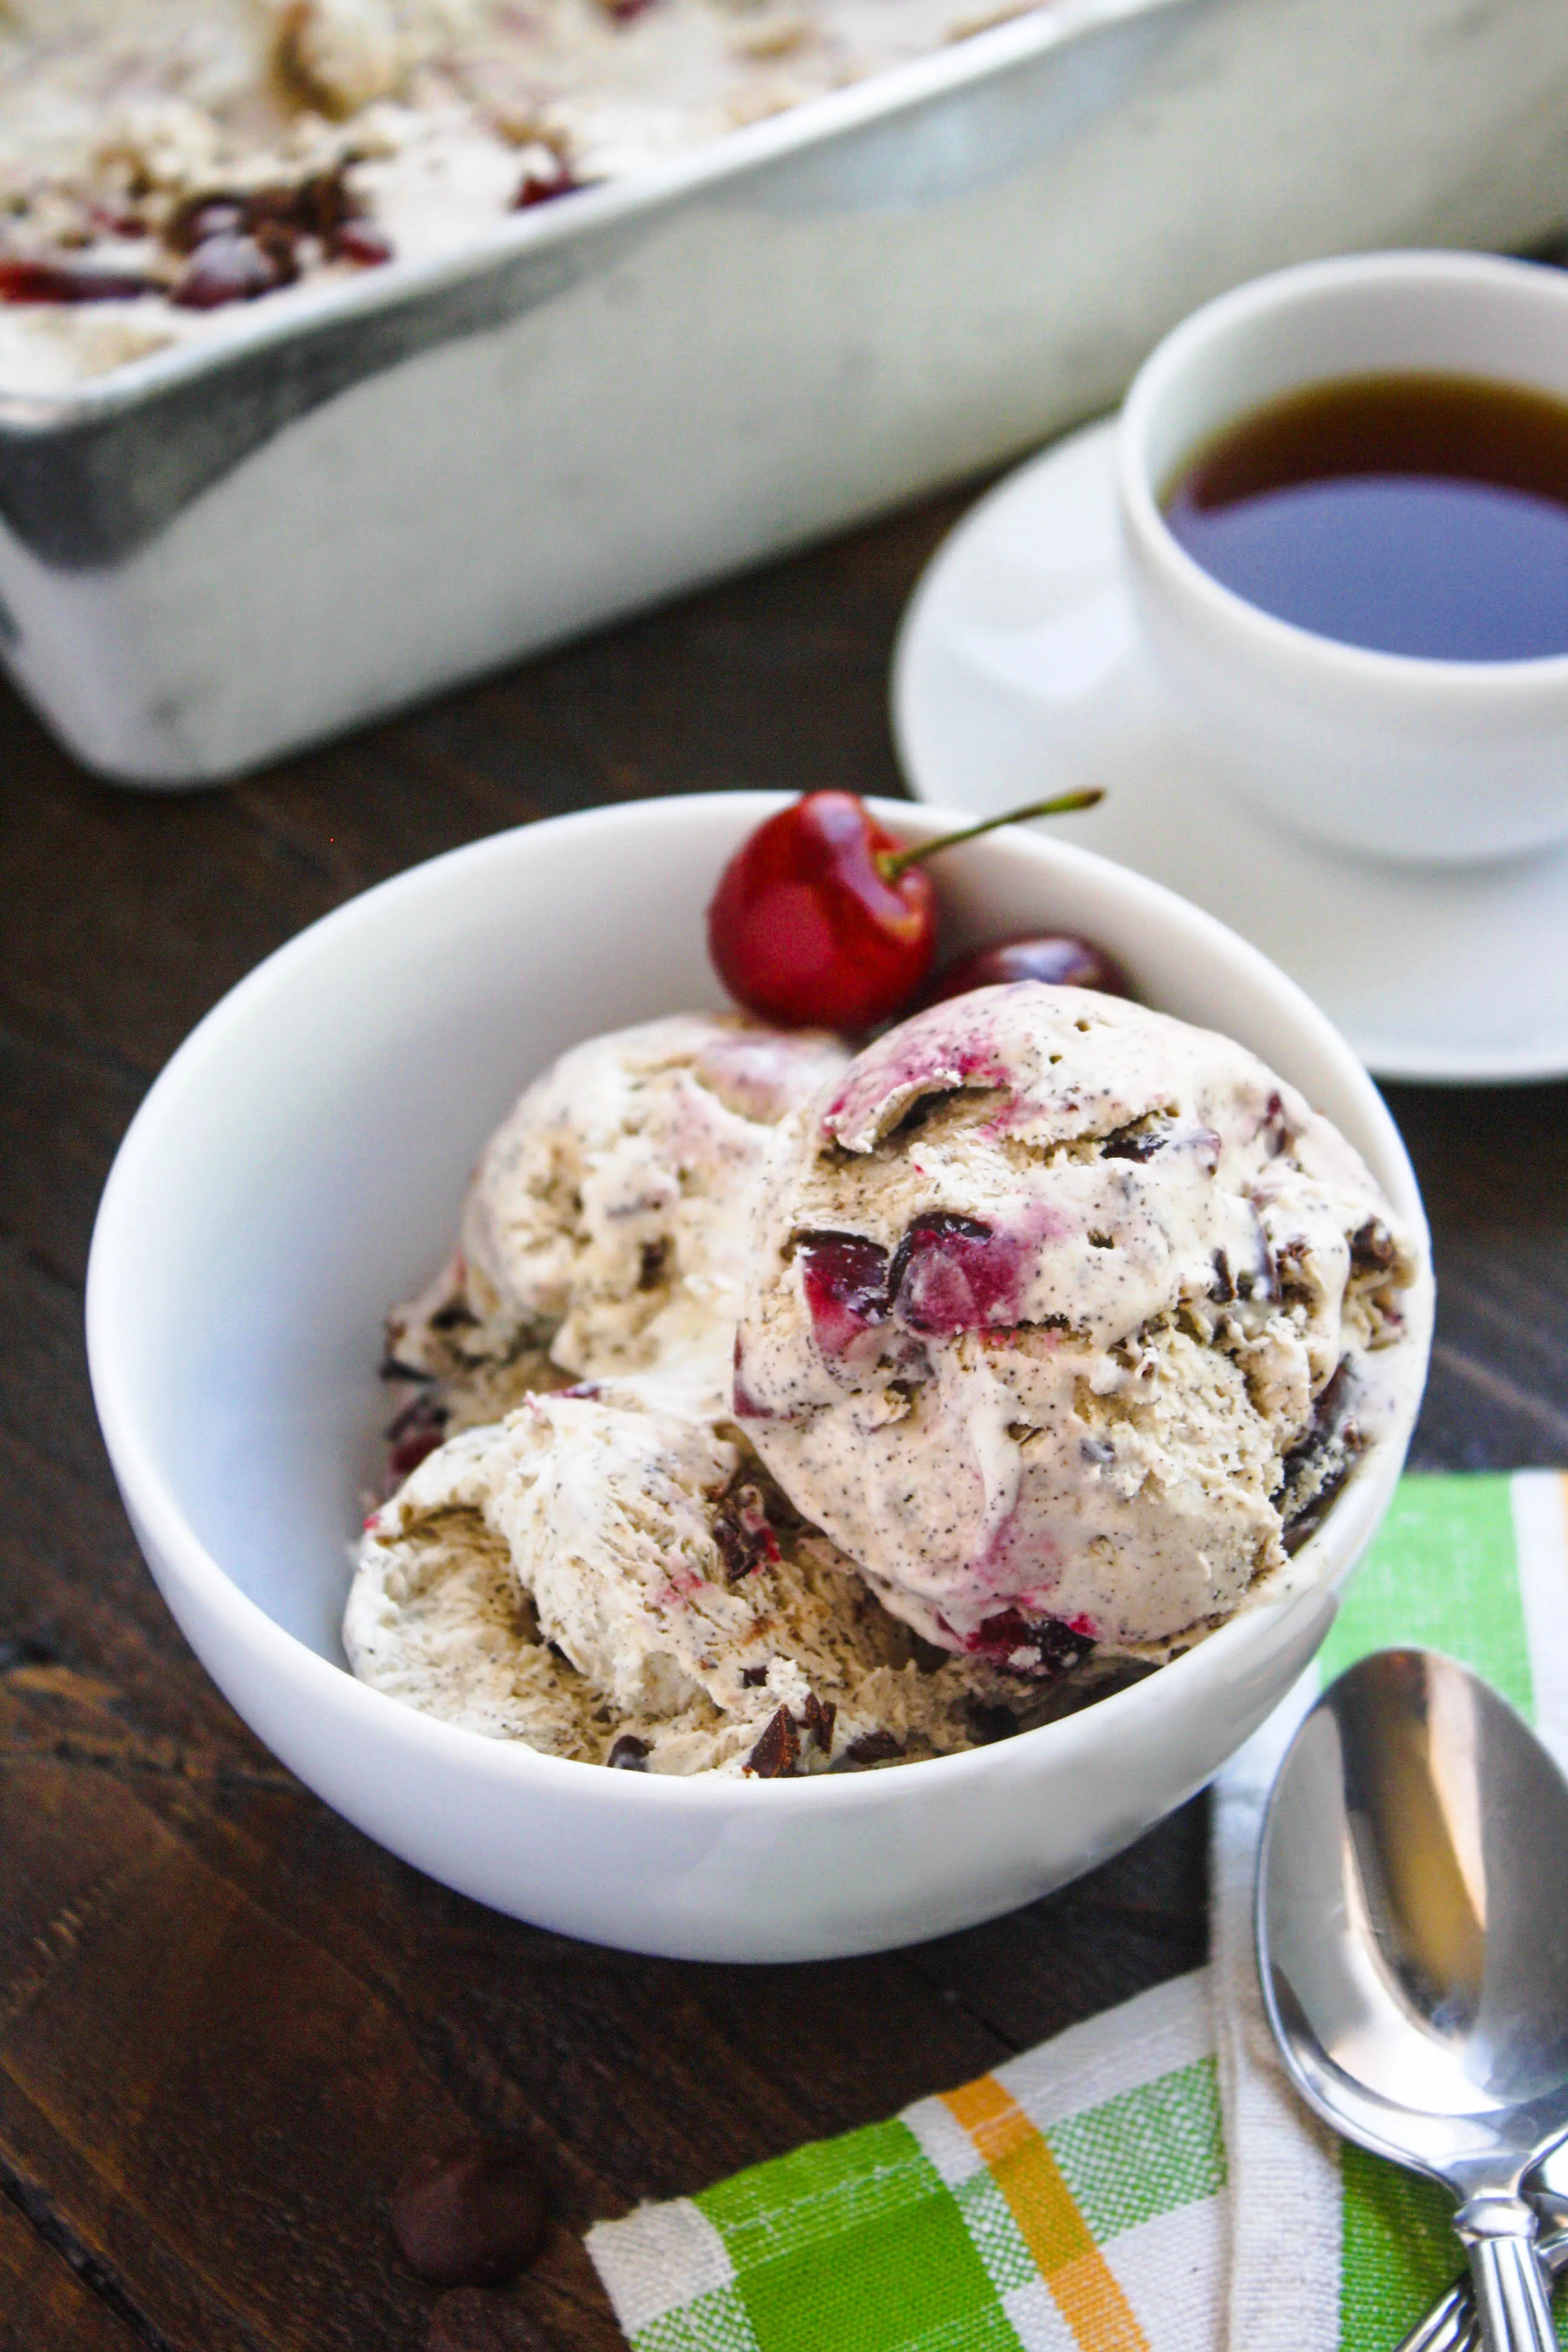 No Churn Cherry Chocolate Chip Espresso Ice Cream is an amazing dessert that you'll love to make. The ingredients take this ice cream over the top!